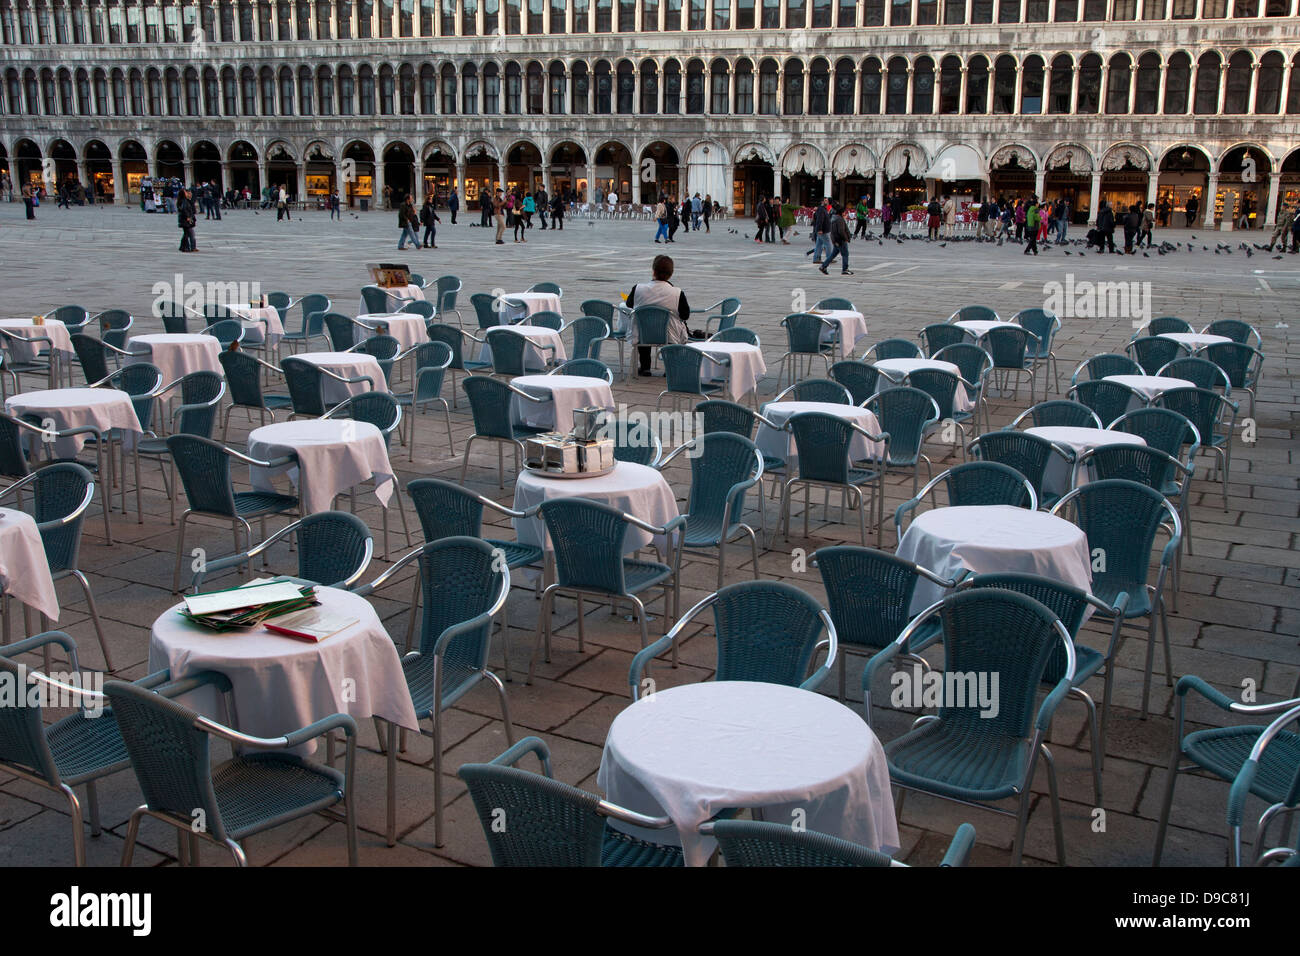 Outdoor restaurant in Piazza San Marco, Venice, Italy. Stock Photo